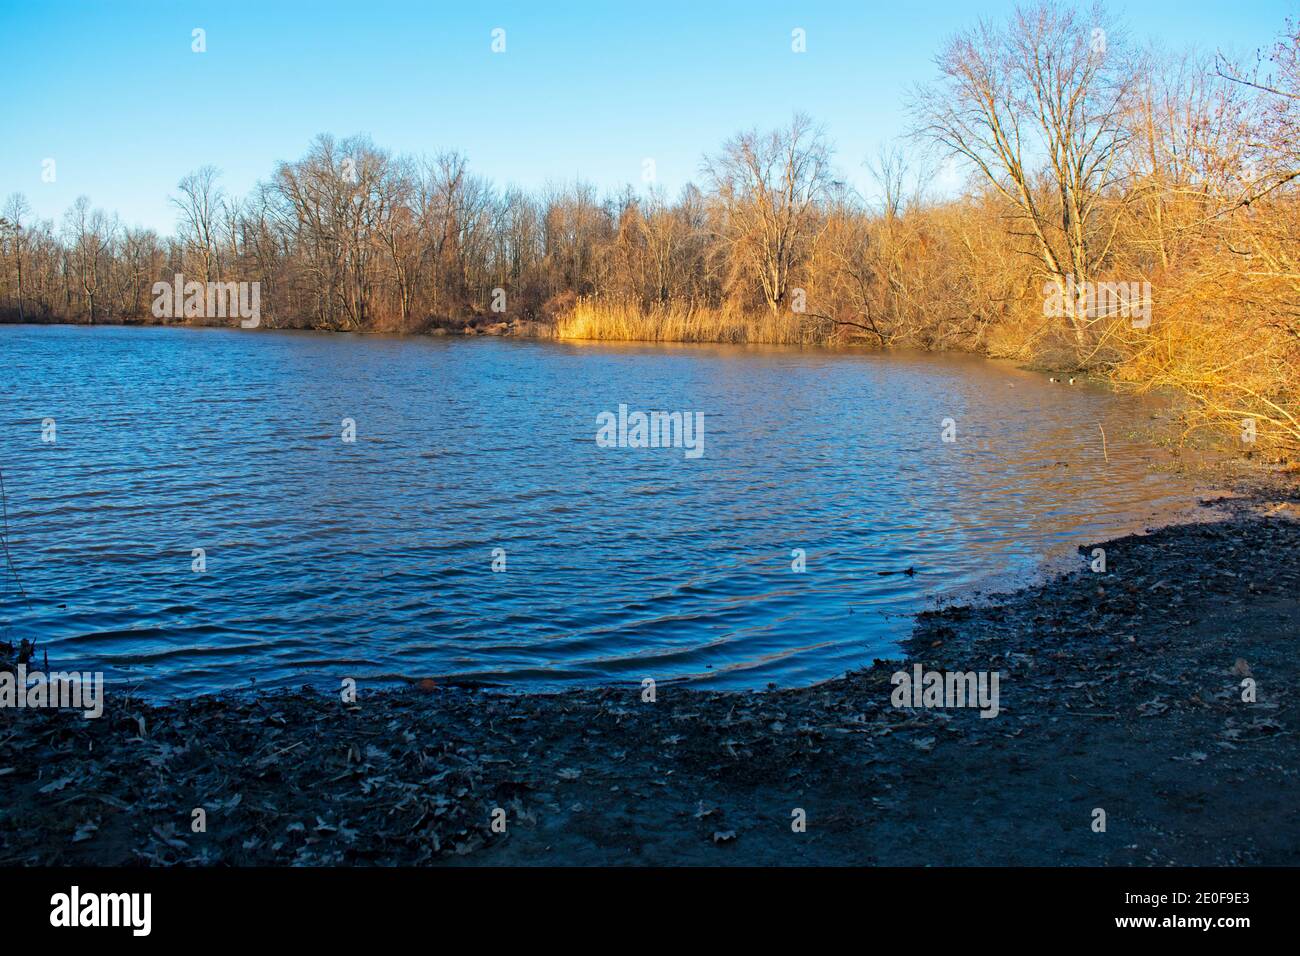 It's a cold, sunny afternoon in early winter with clear skies at Lake Marlu in Thompson Park, Holmdel, New Jersey, USA. -07 Stock Photo